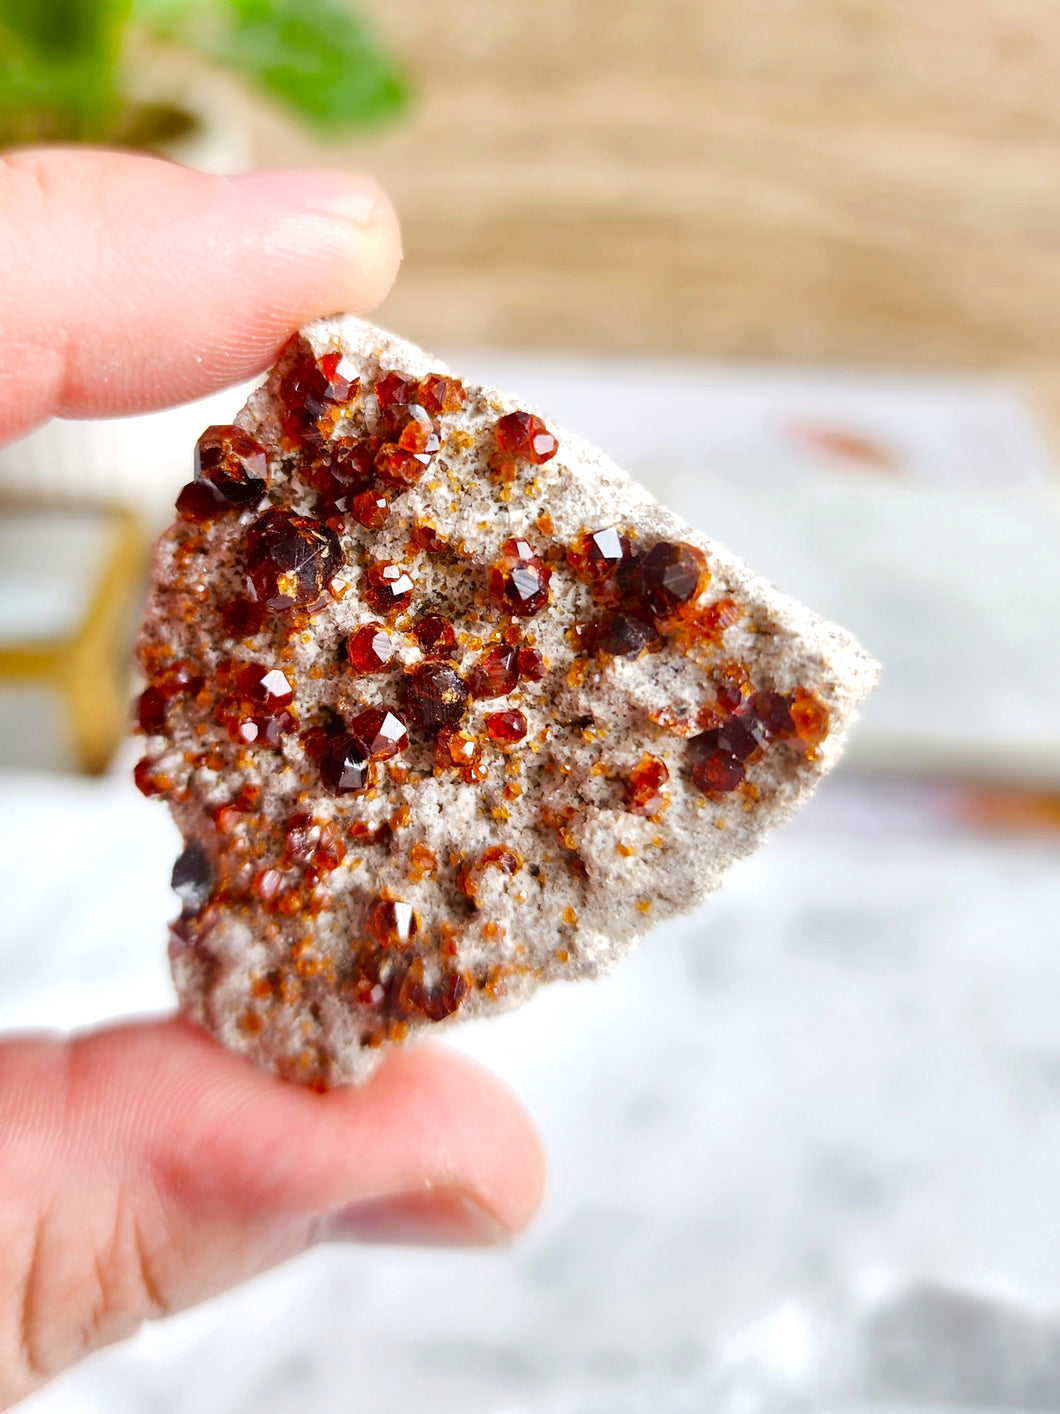 Spessartine garnet is thought to boost creativity, passion, and courage, while cleansing negative energies and enhancing spiritual connection